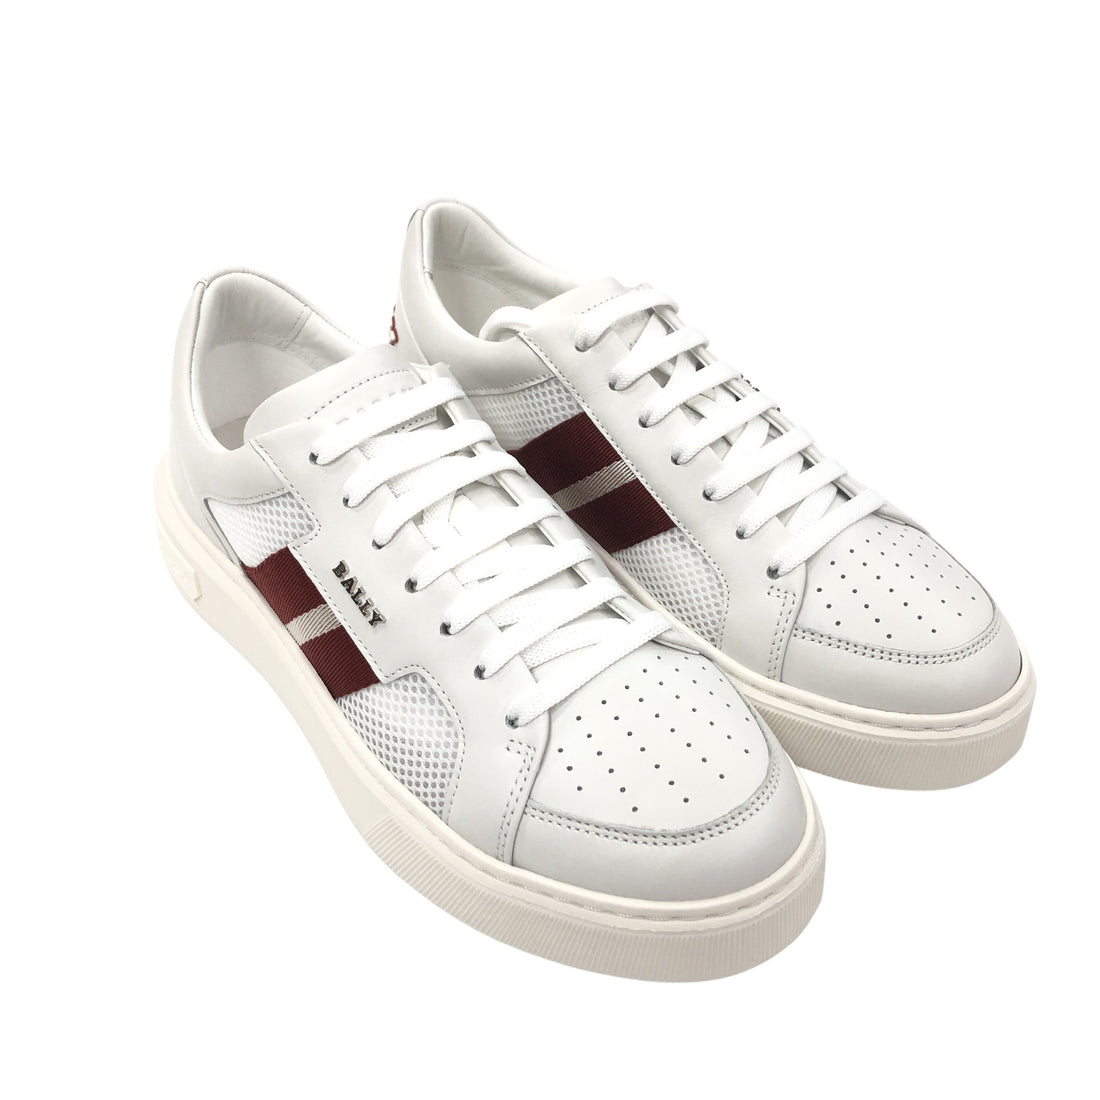 Bally Melys Sneaker In White Leather Sneakers